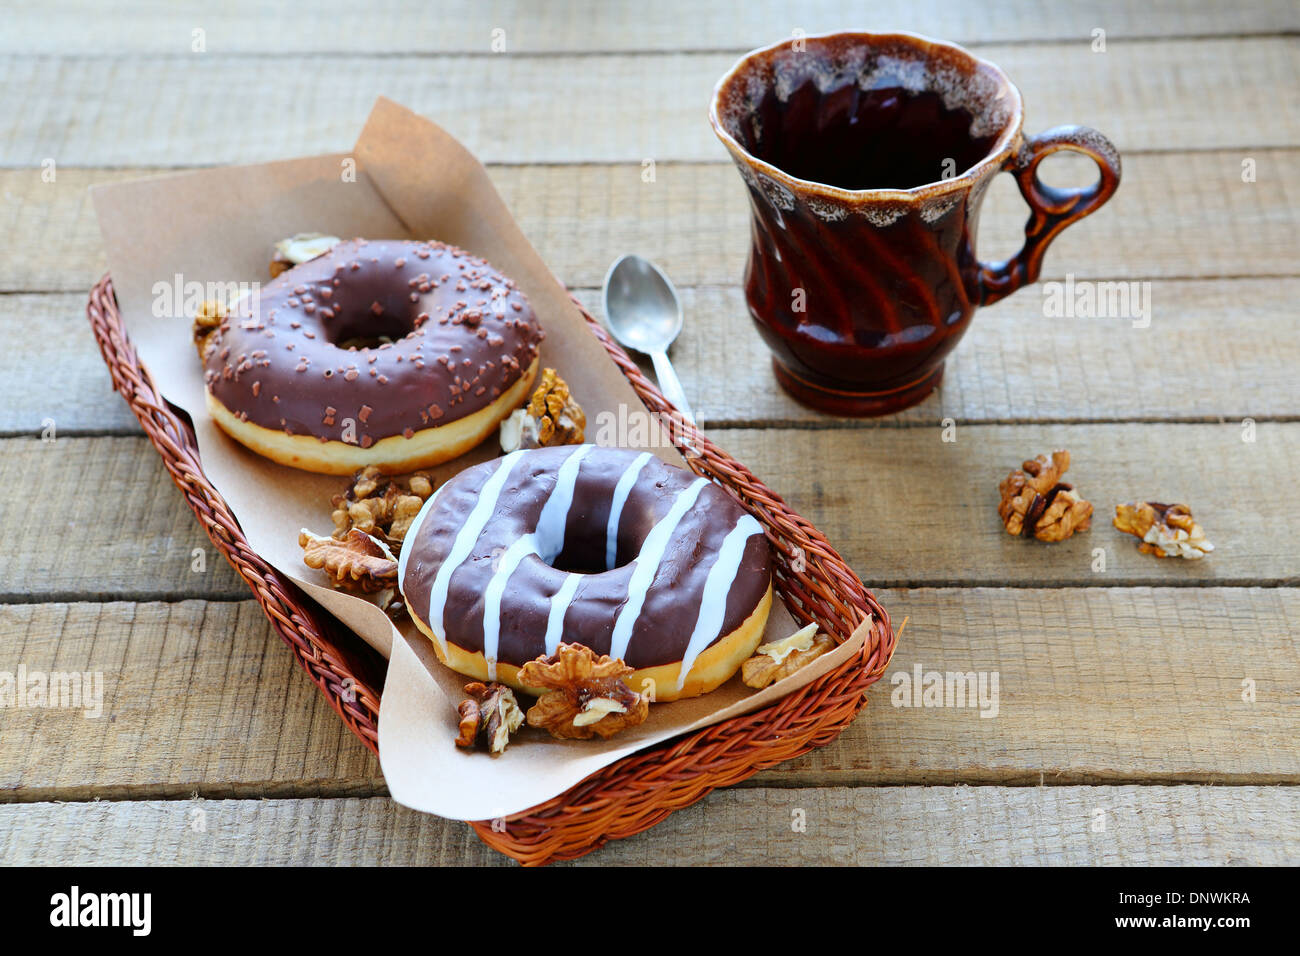 donuts with chocolate frosting, food closeup Stock Photo